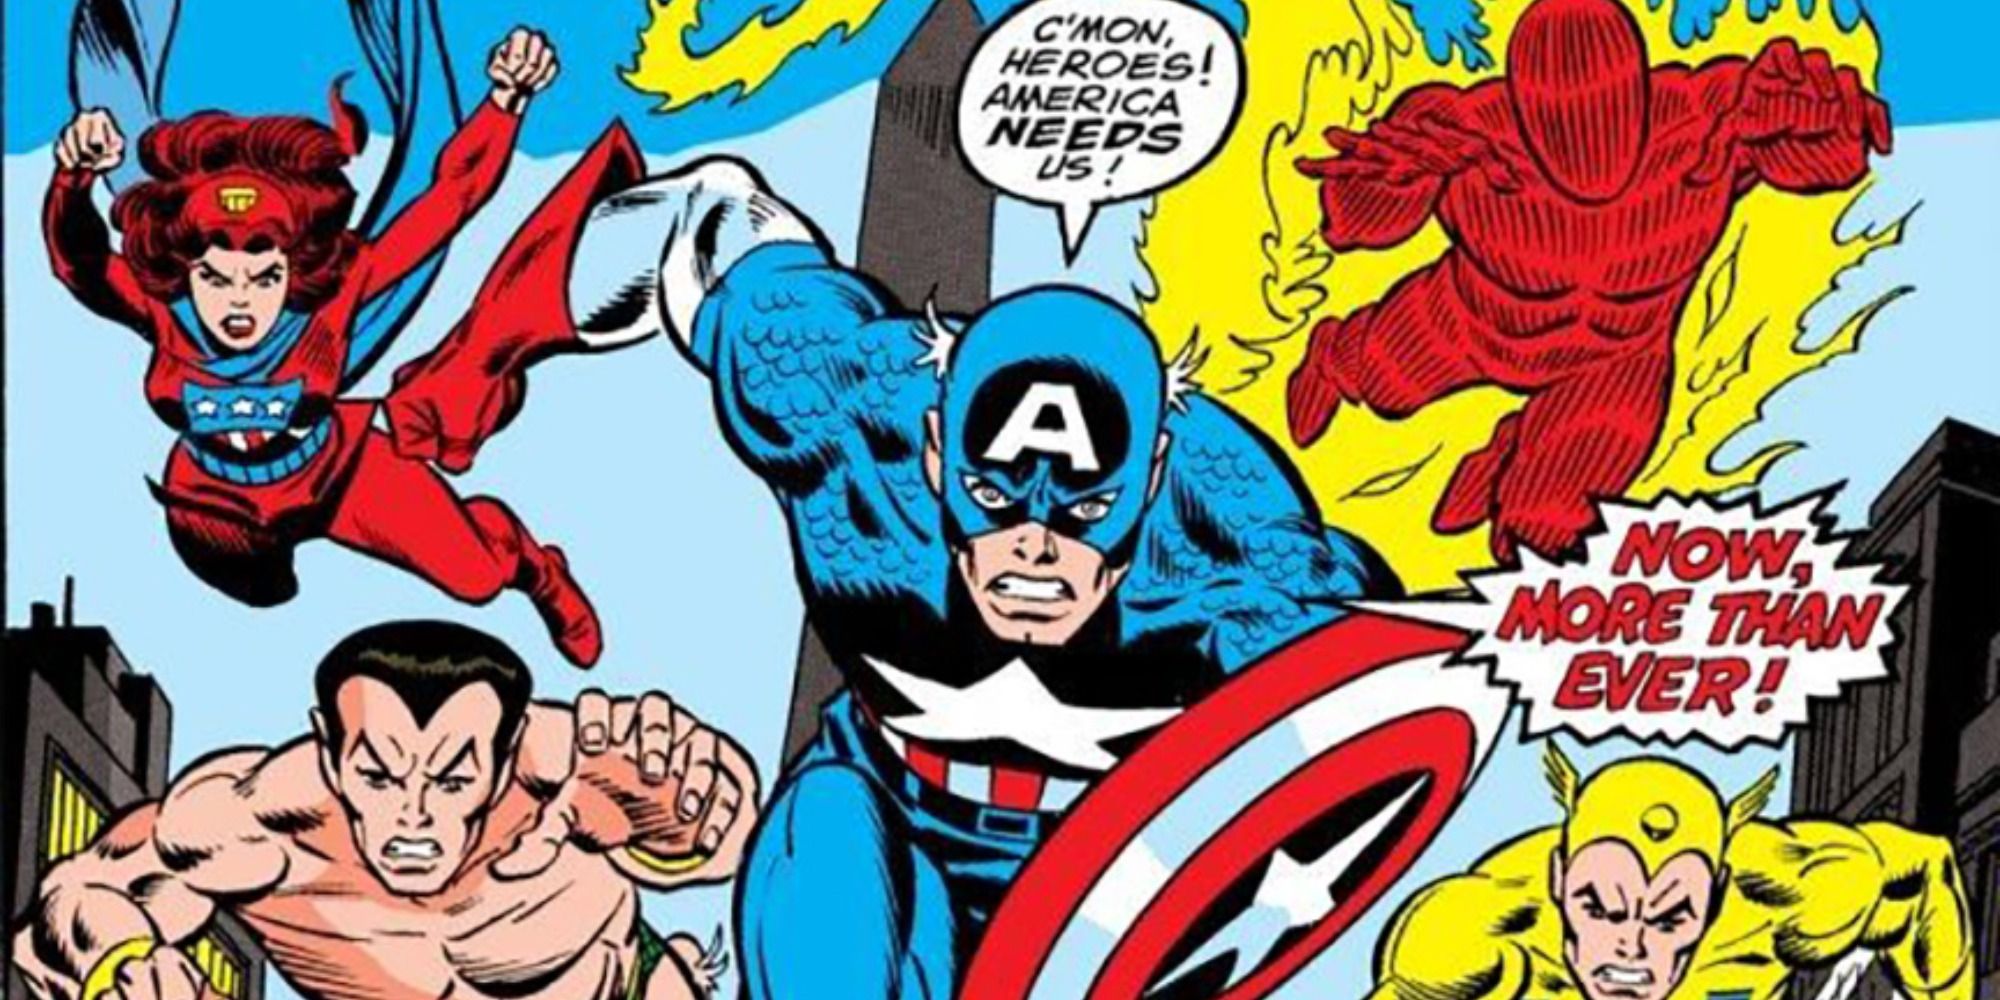 Captain America leads the Invaders into battle in Marvel Comics.